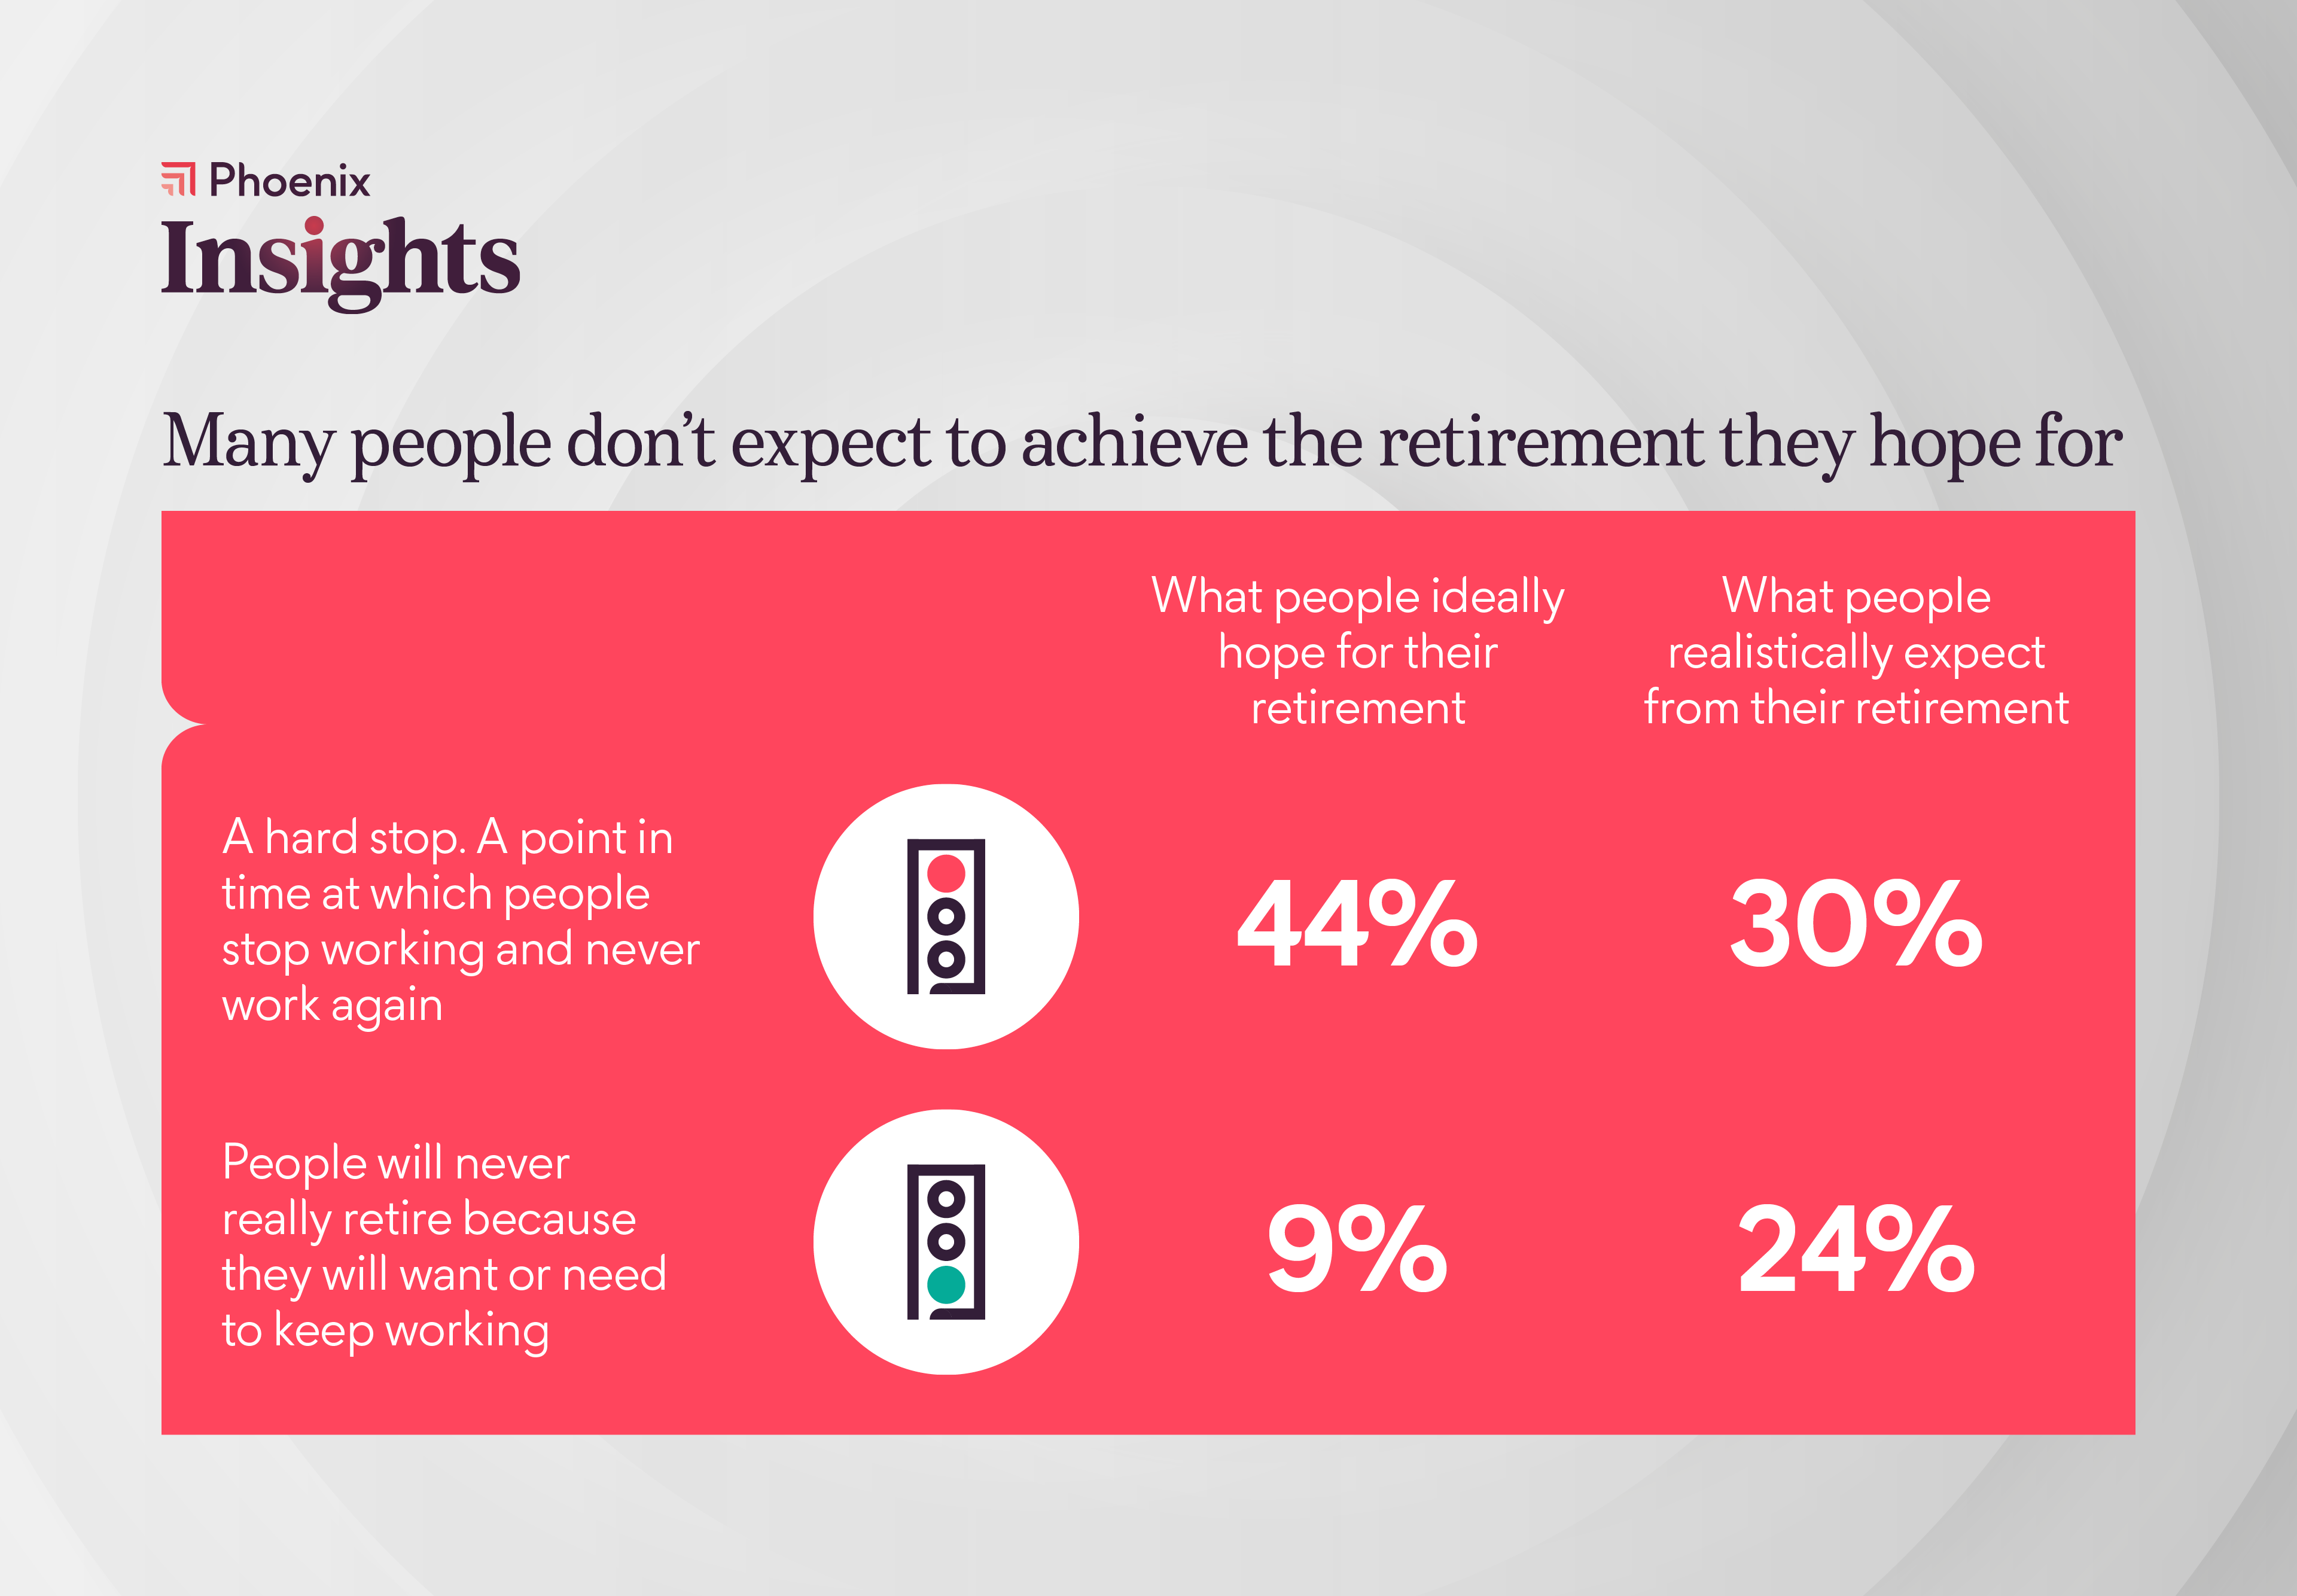 Many people don't expect to achieve the retirement they hope for. 44% of people ideally hope for a hard stop retirement but just 30% think they will actually achieve it. Only 9% want to continue working in some capacity while 24% think that this is the realistic path for them